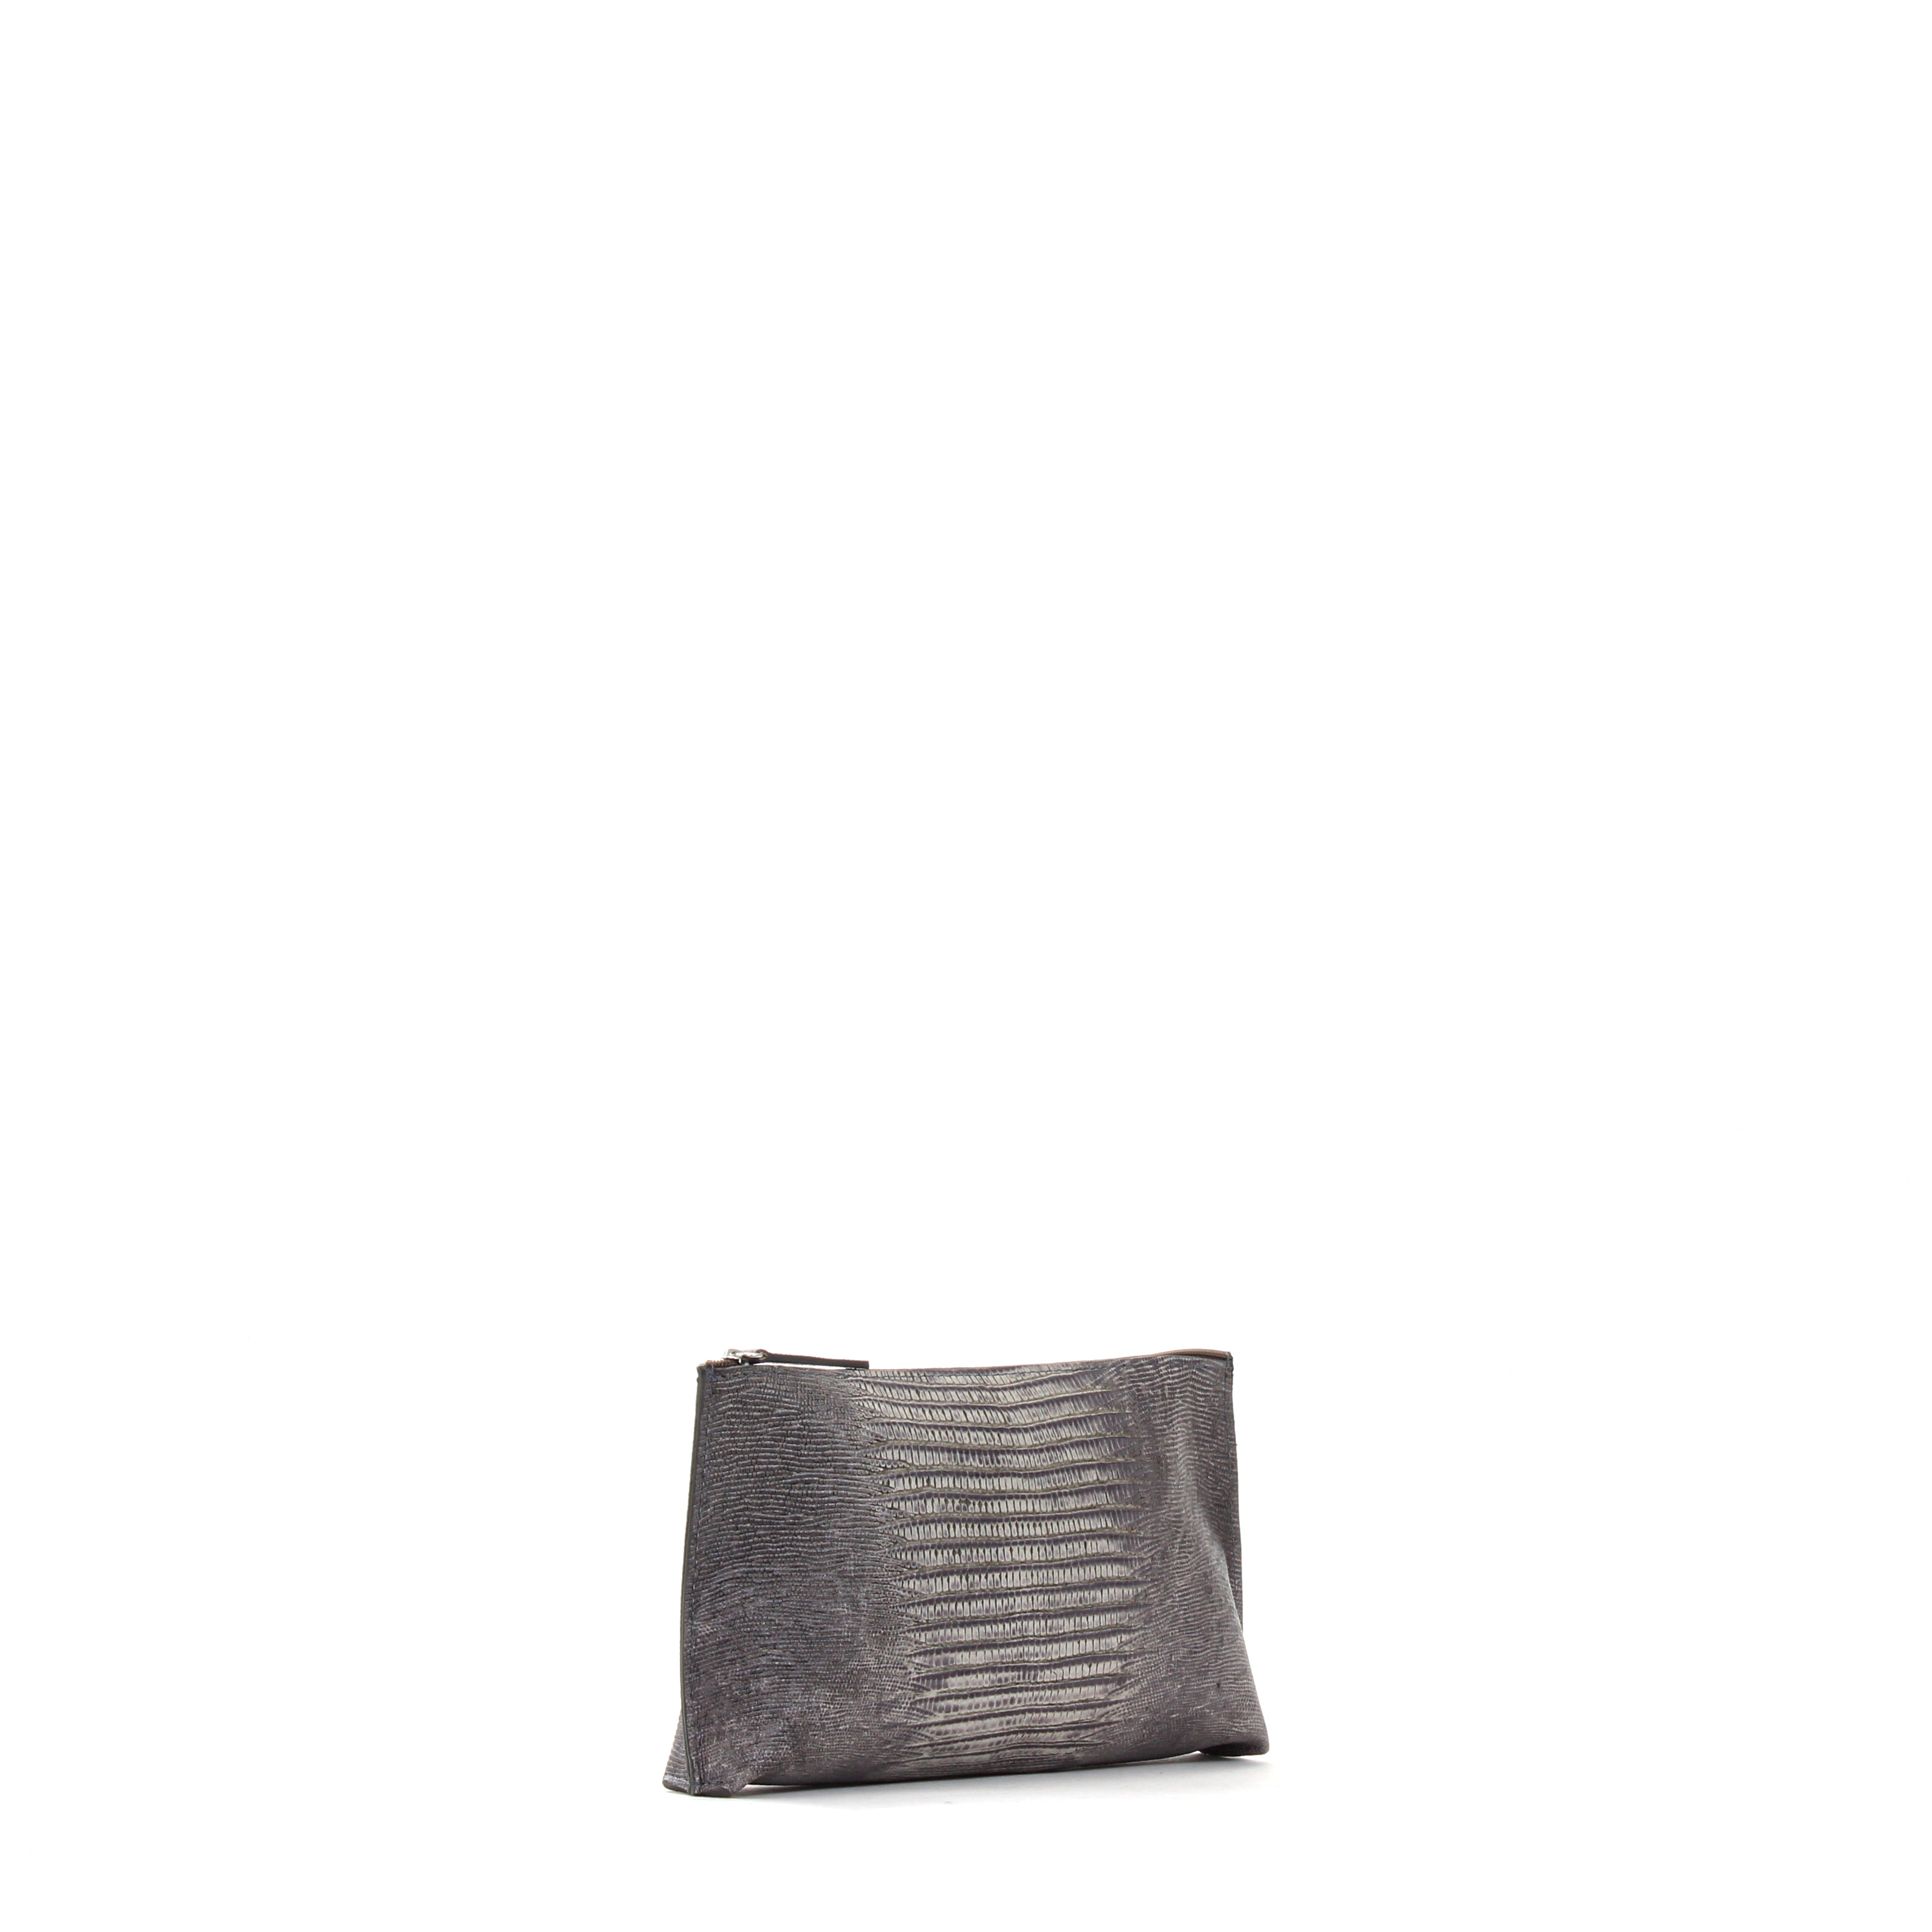 ESSENTIAL POUCH GREY EMBOSSED LIZARD